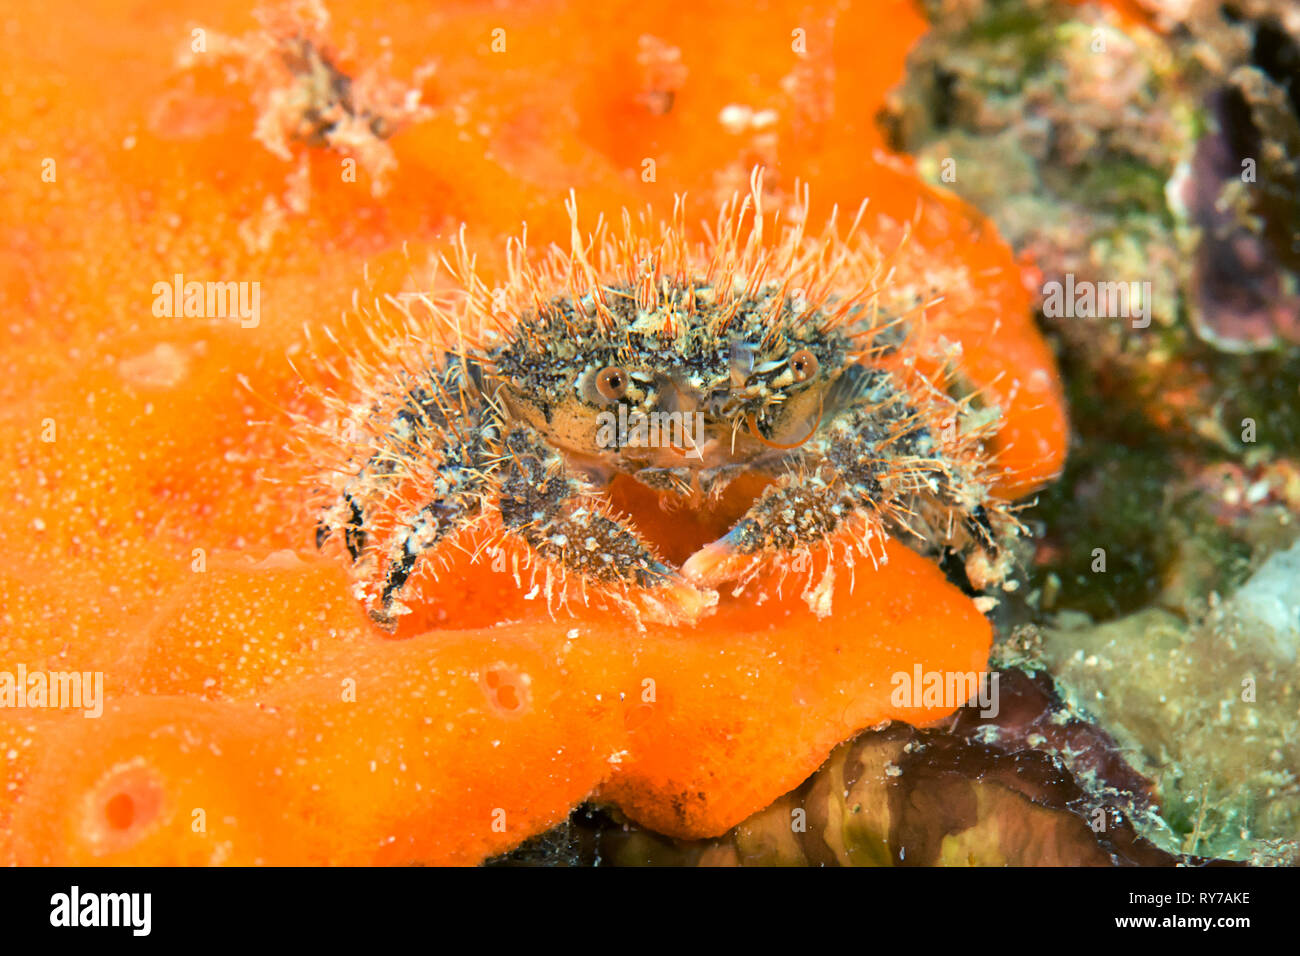 Hairy crab sitting on coral of Lembeh strait Stock Photo